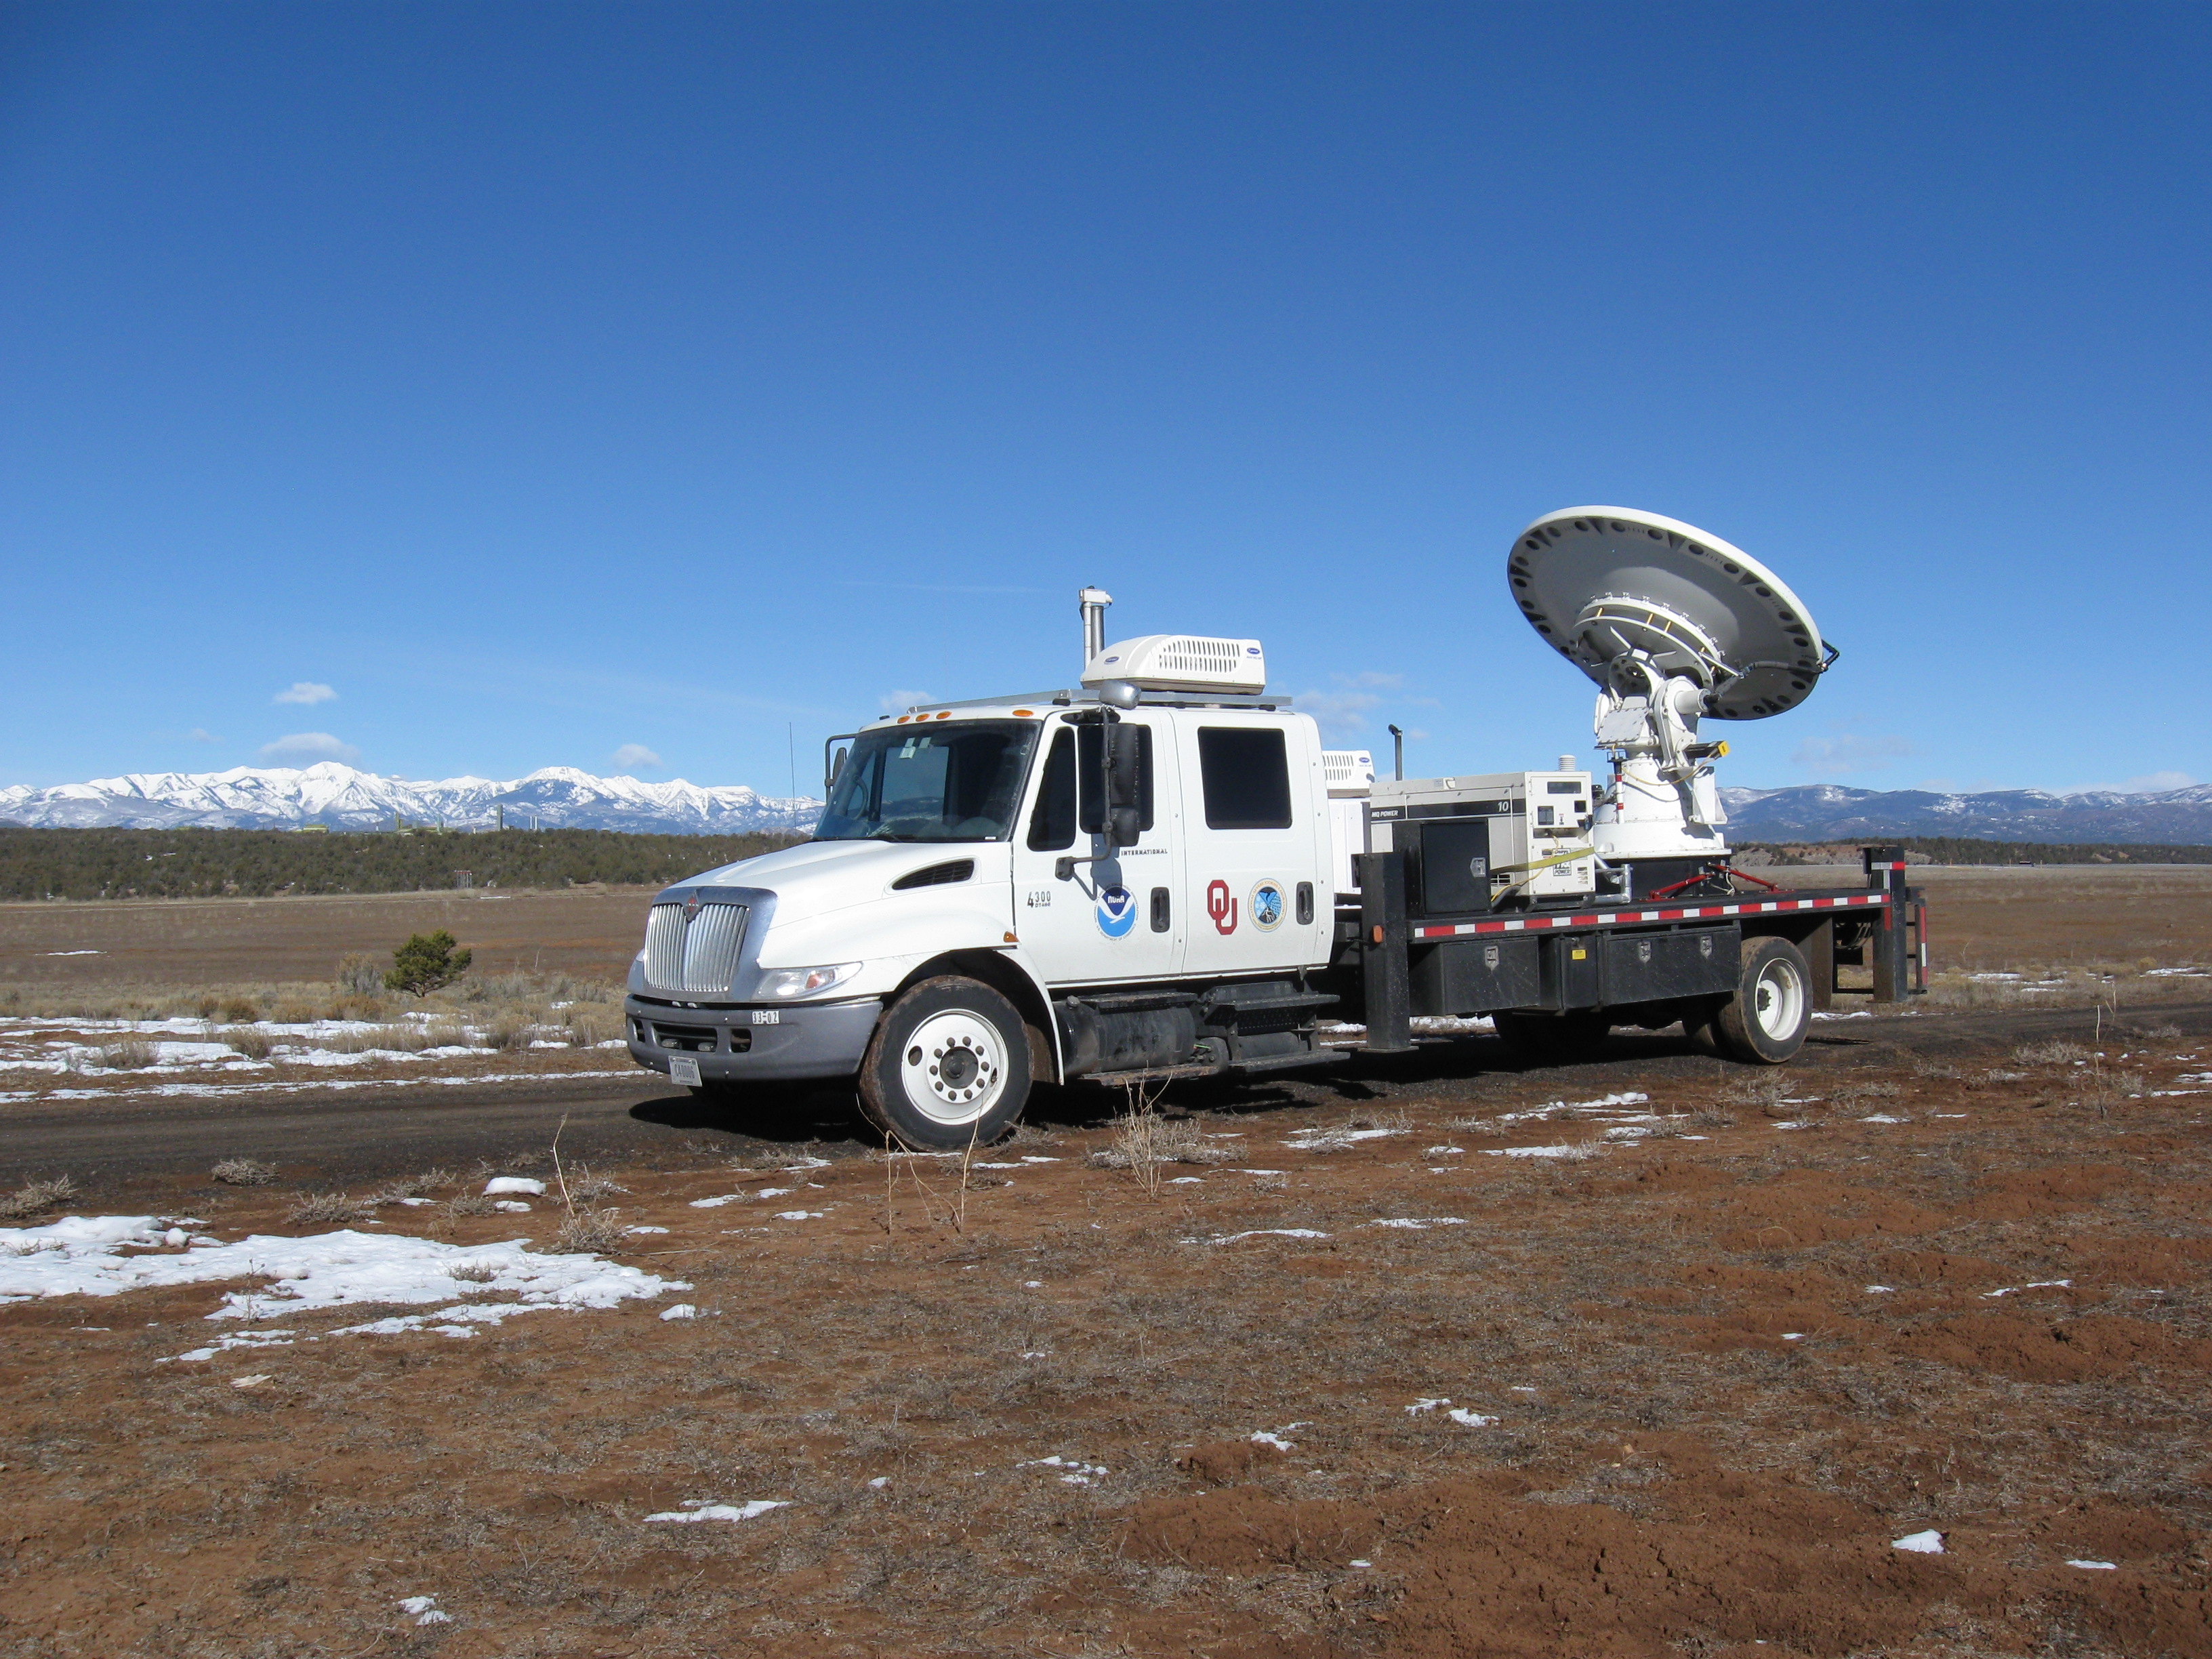 NSSL deploys mobile radar to help with winter weather forecasts